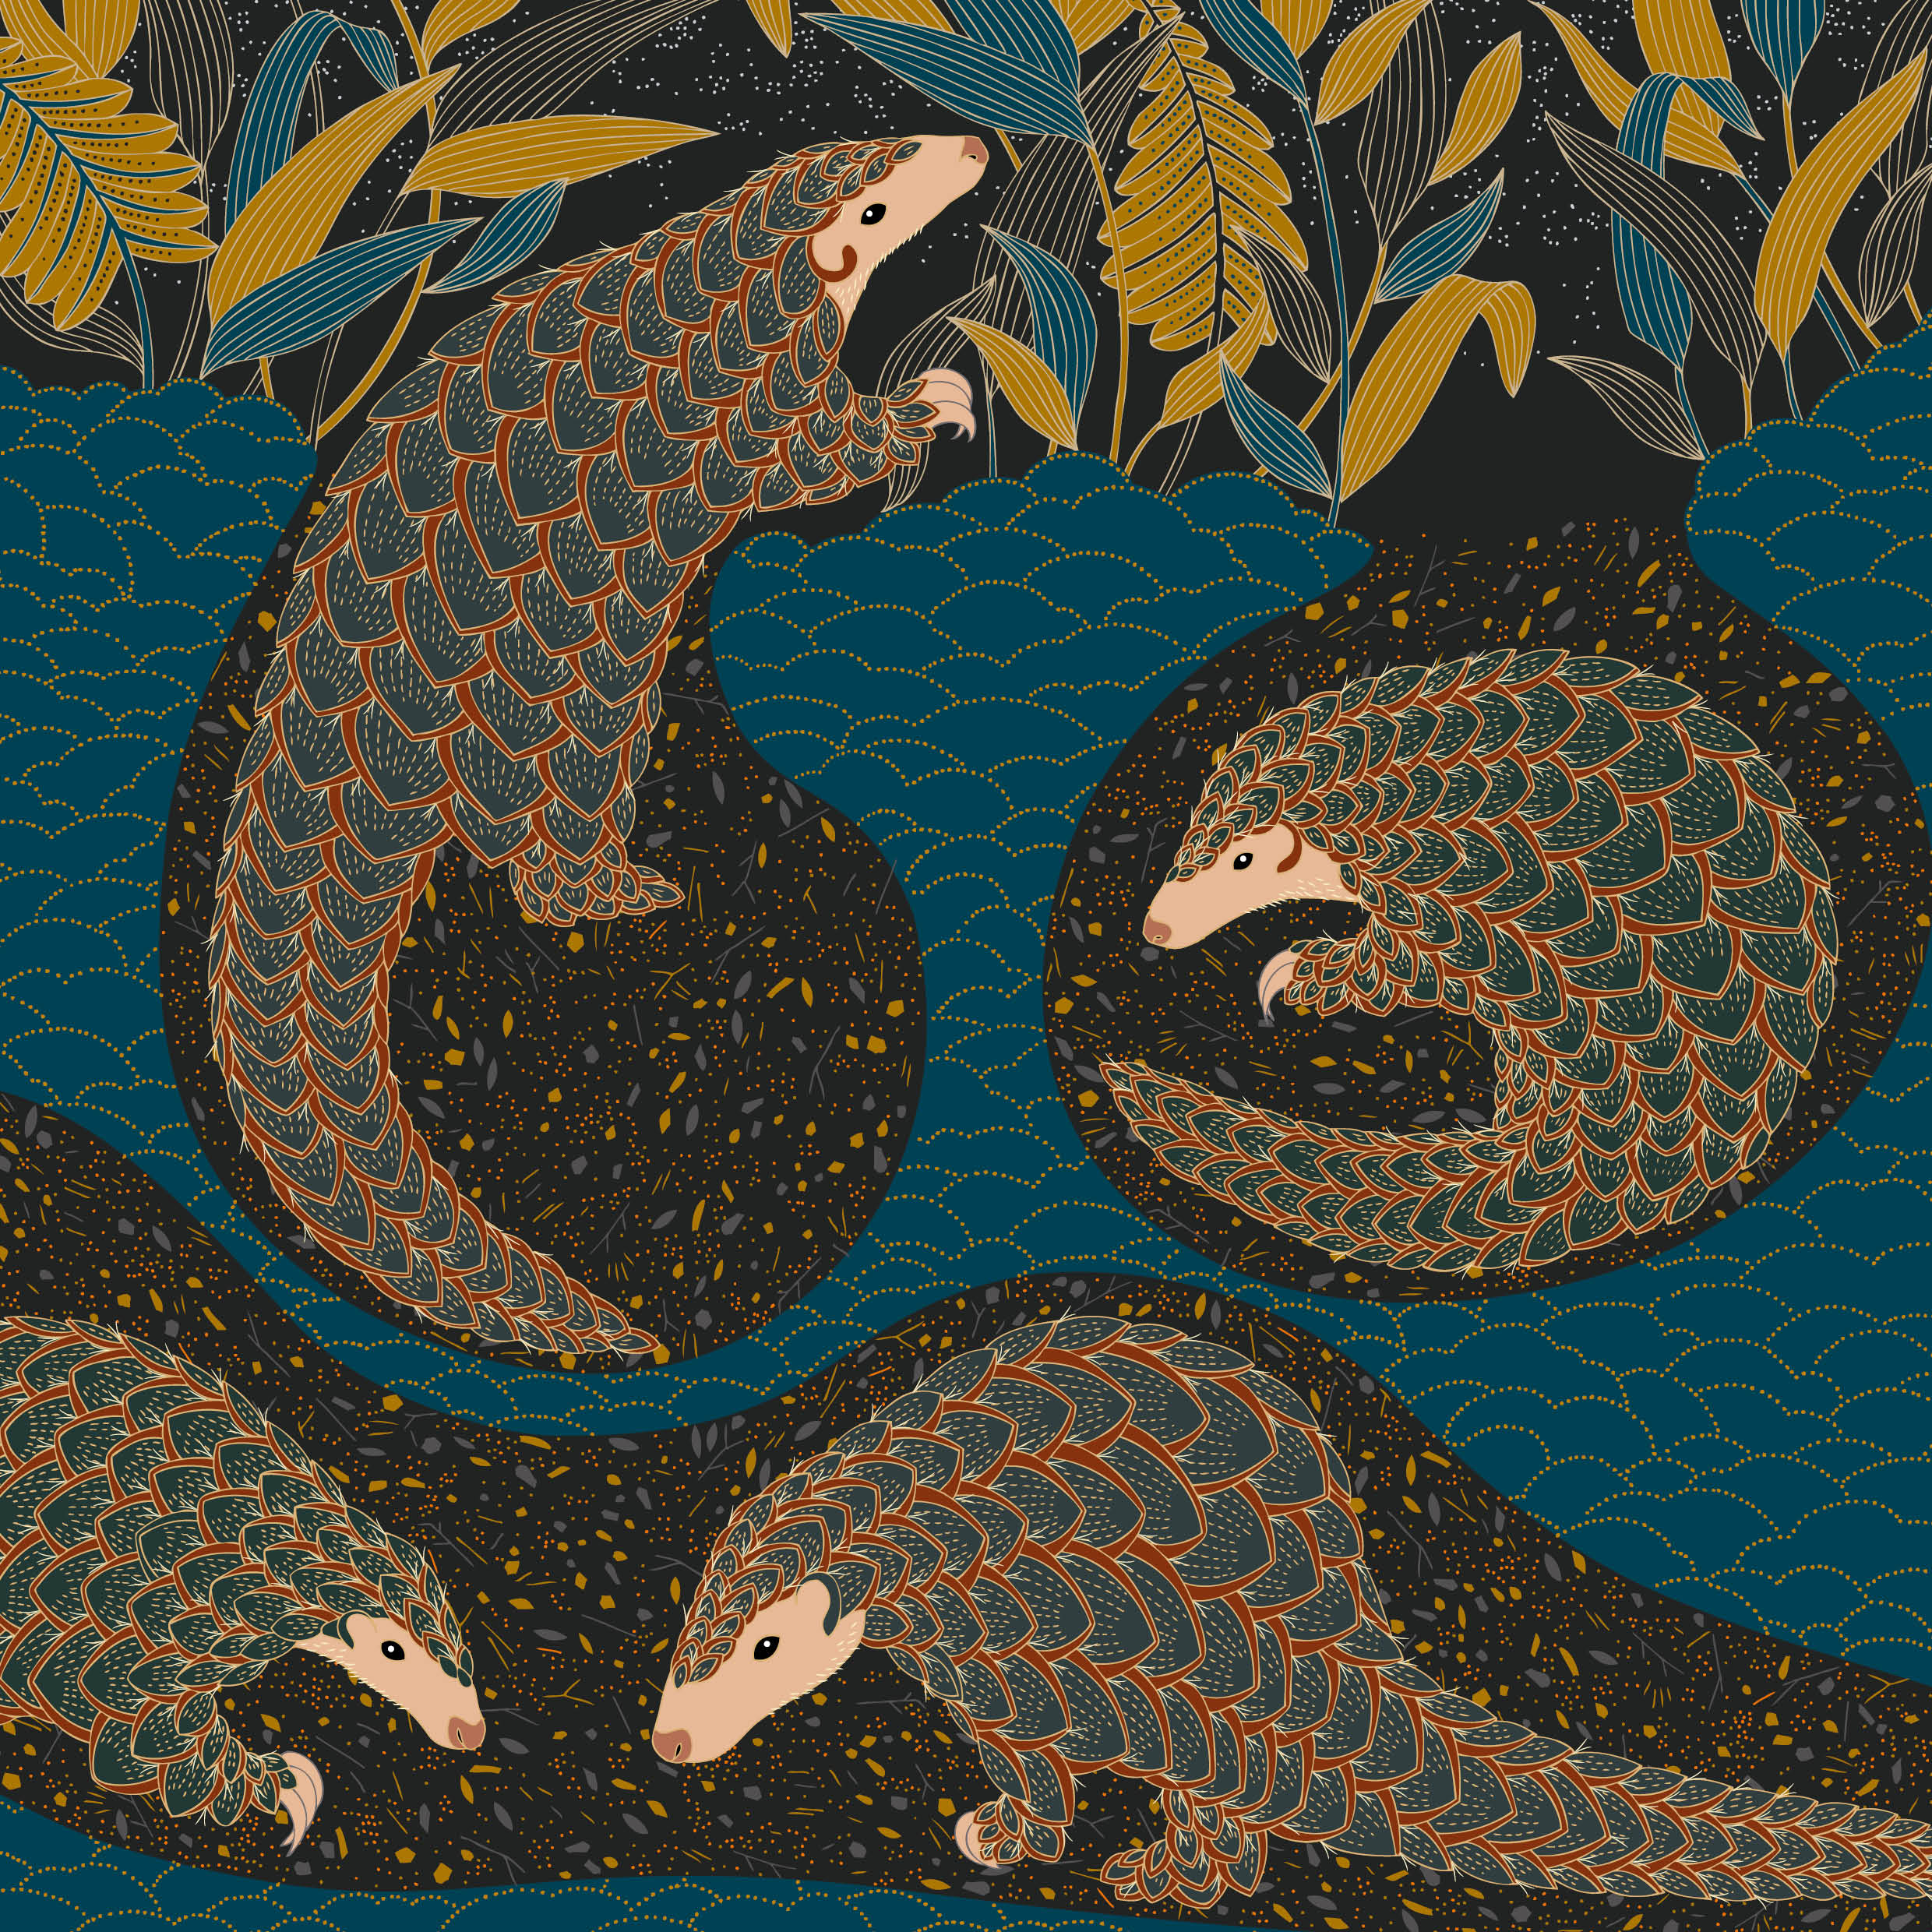 An illustration by Millie Marotta of a pangolin